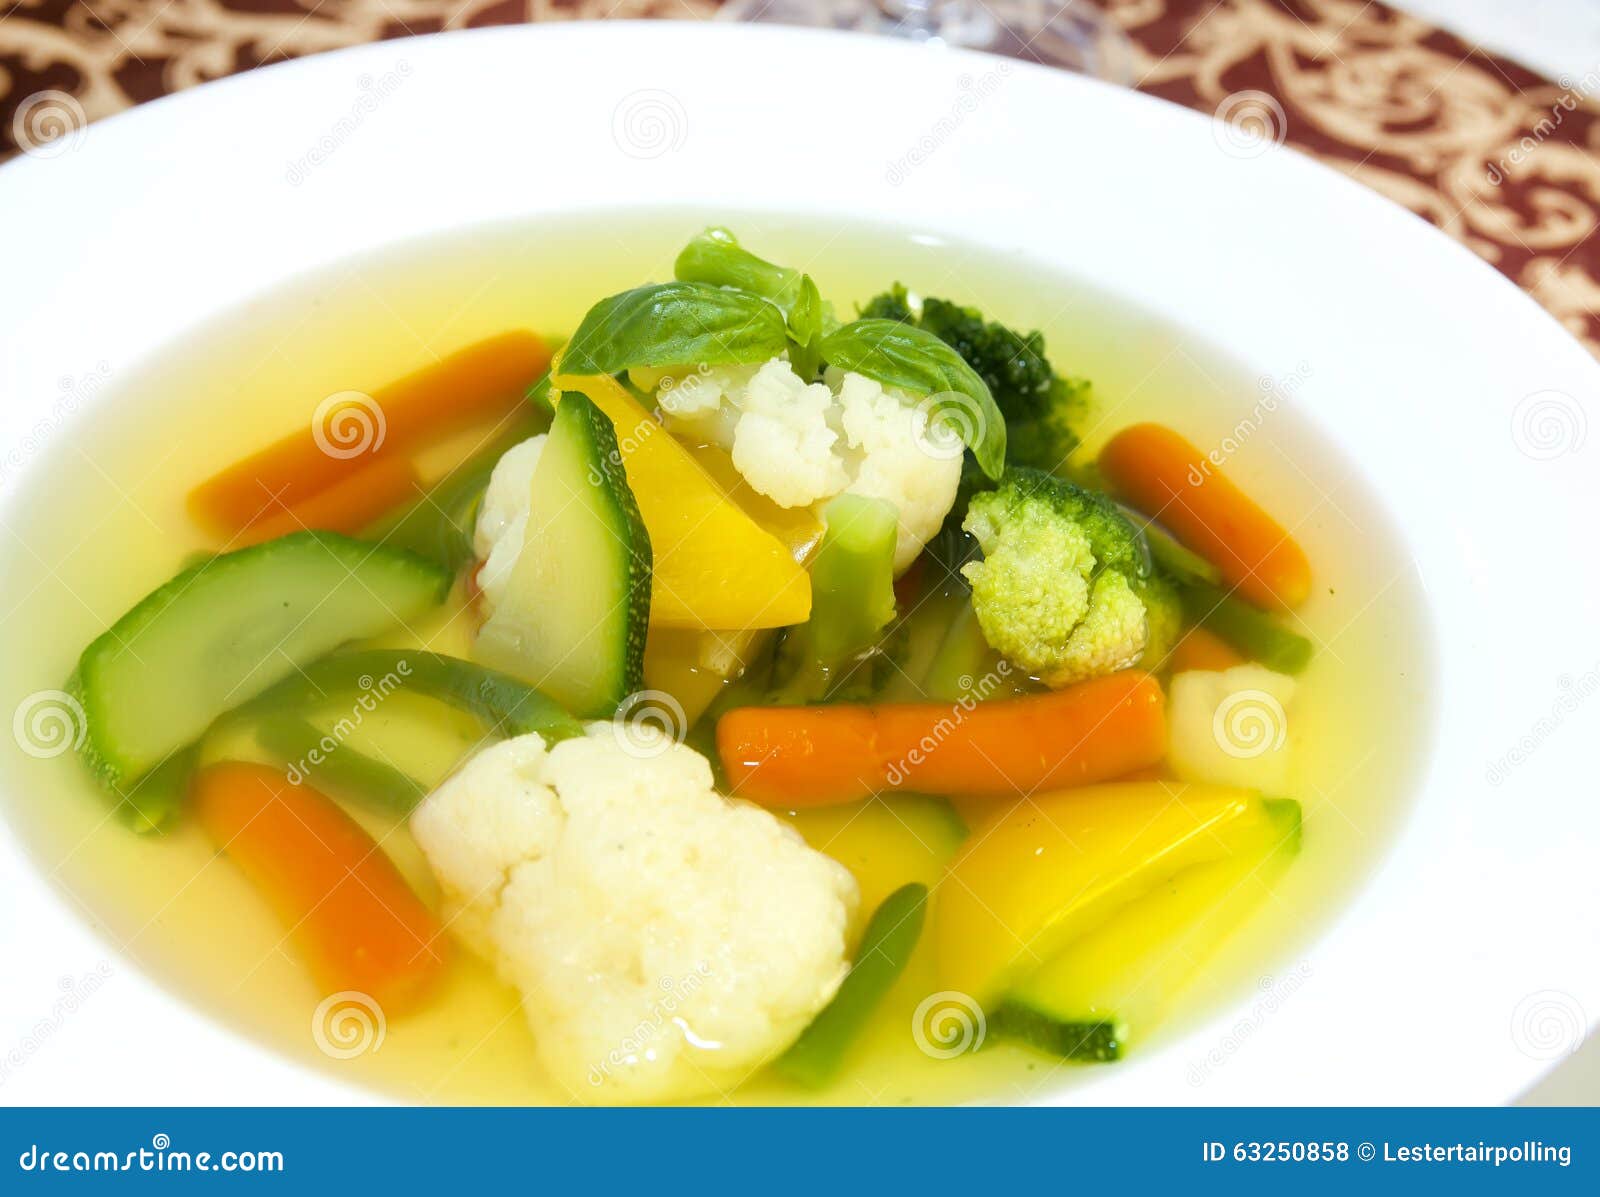 Vegetable soup stock photo. Image of culinary, freshness - 63250858